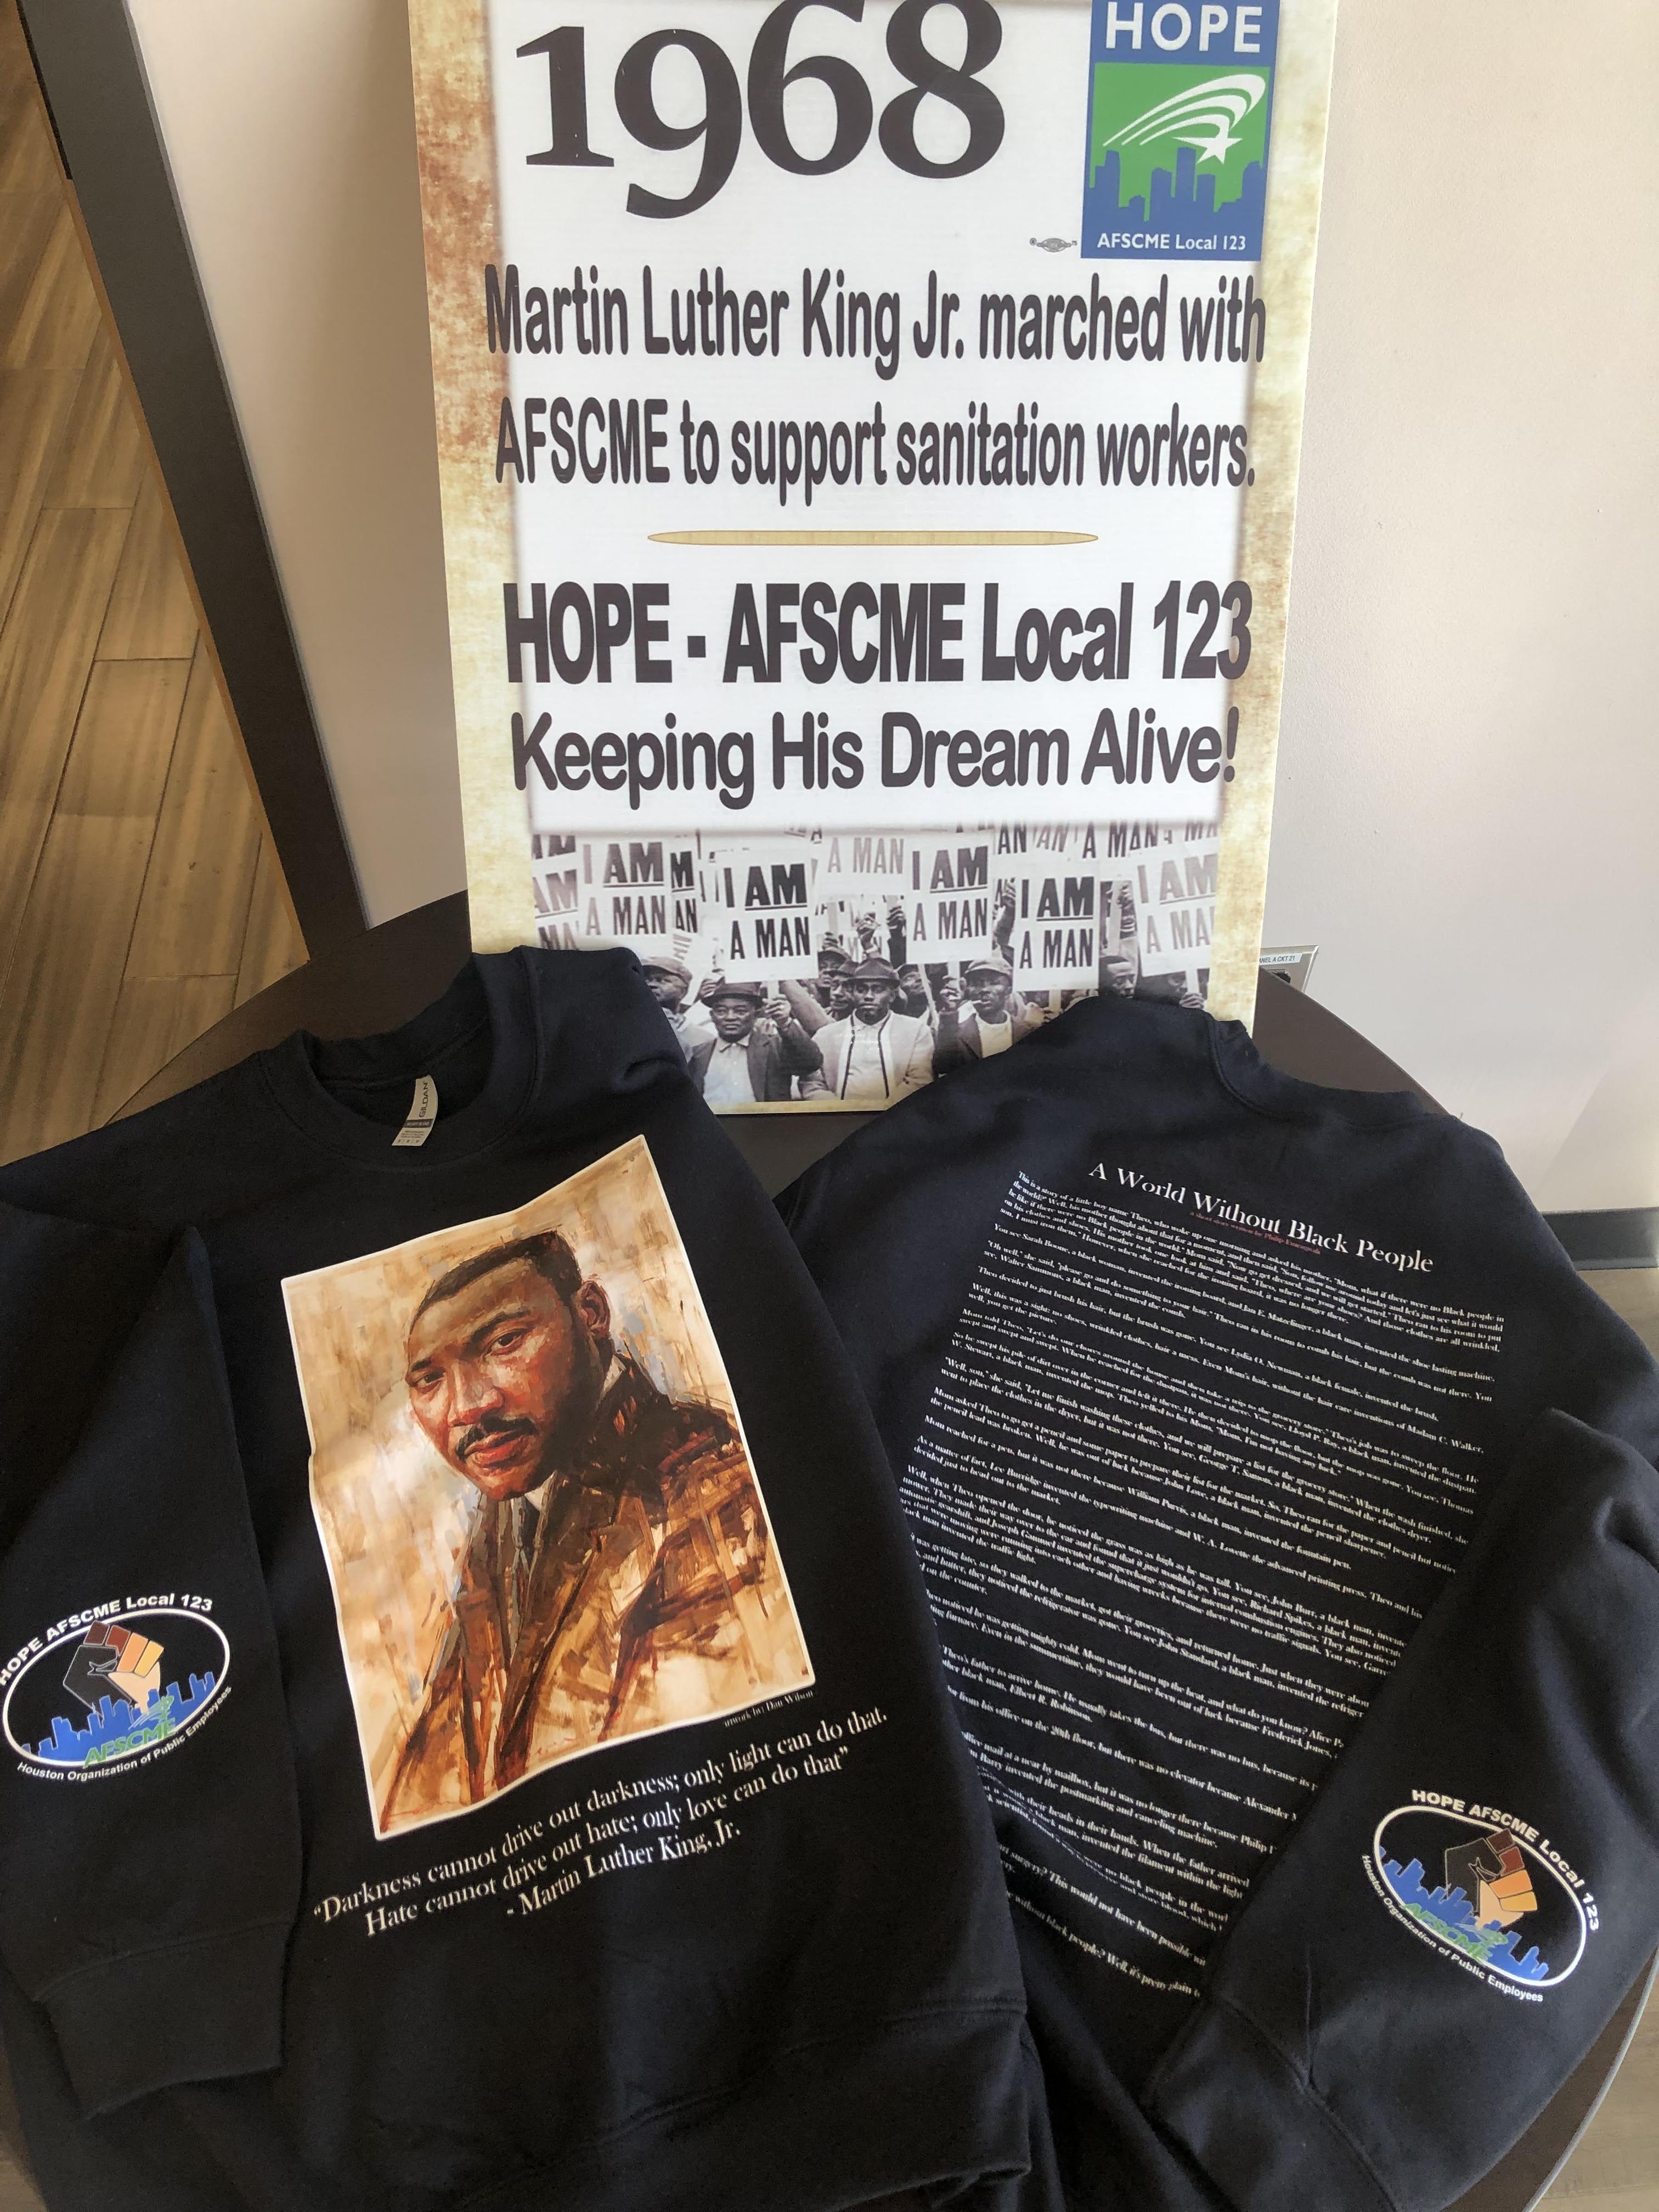 HOPE AFSCME Local 123 Members to March in the 46th Annual MLK Jr Parade